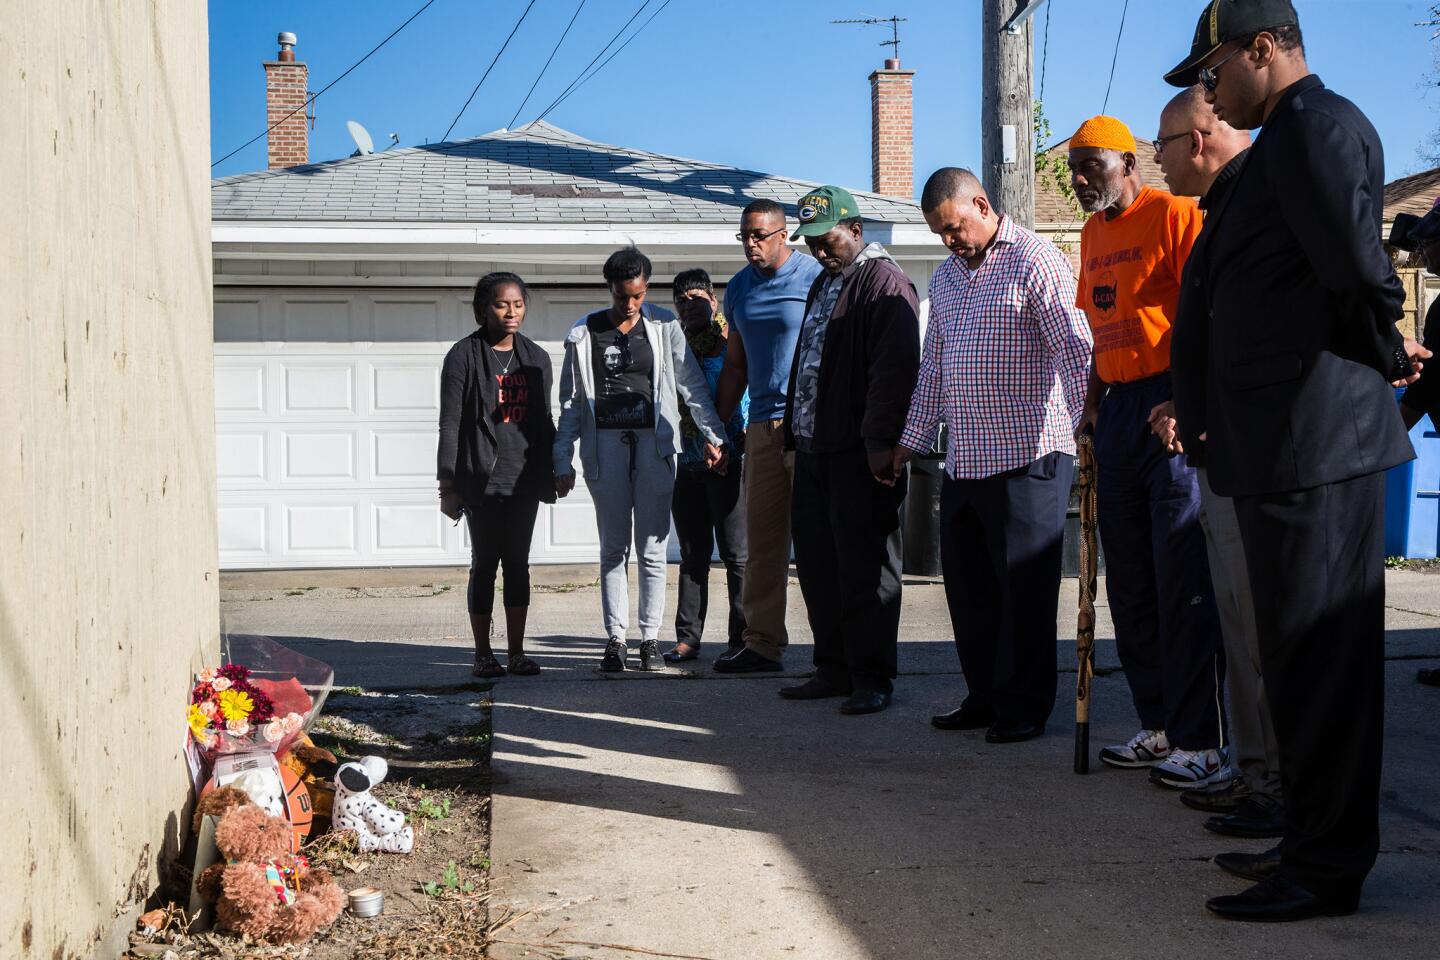 Community activists and parents pray at the memorial for 9-year-old Tyshawn Lee on Nov. 3, 2015. Lee was fatally shot a day earlier in Chicago's Gresham neighborhood in the 8000 block of South Damen Avenue.